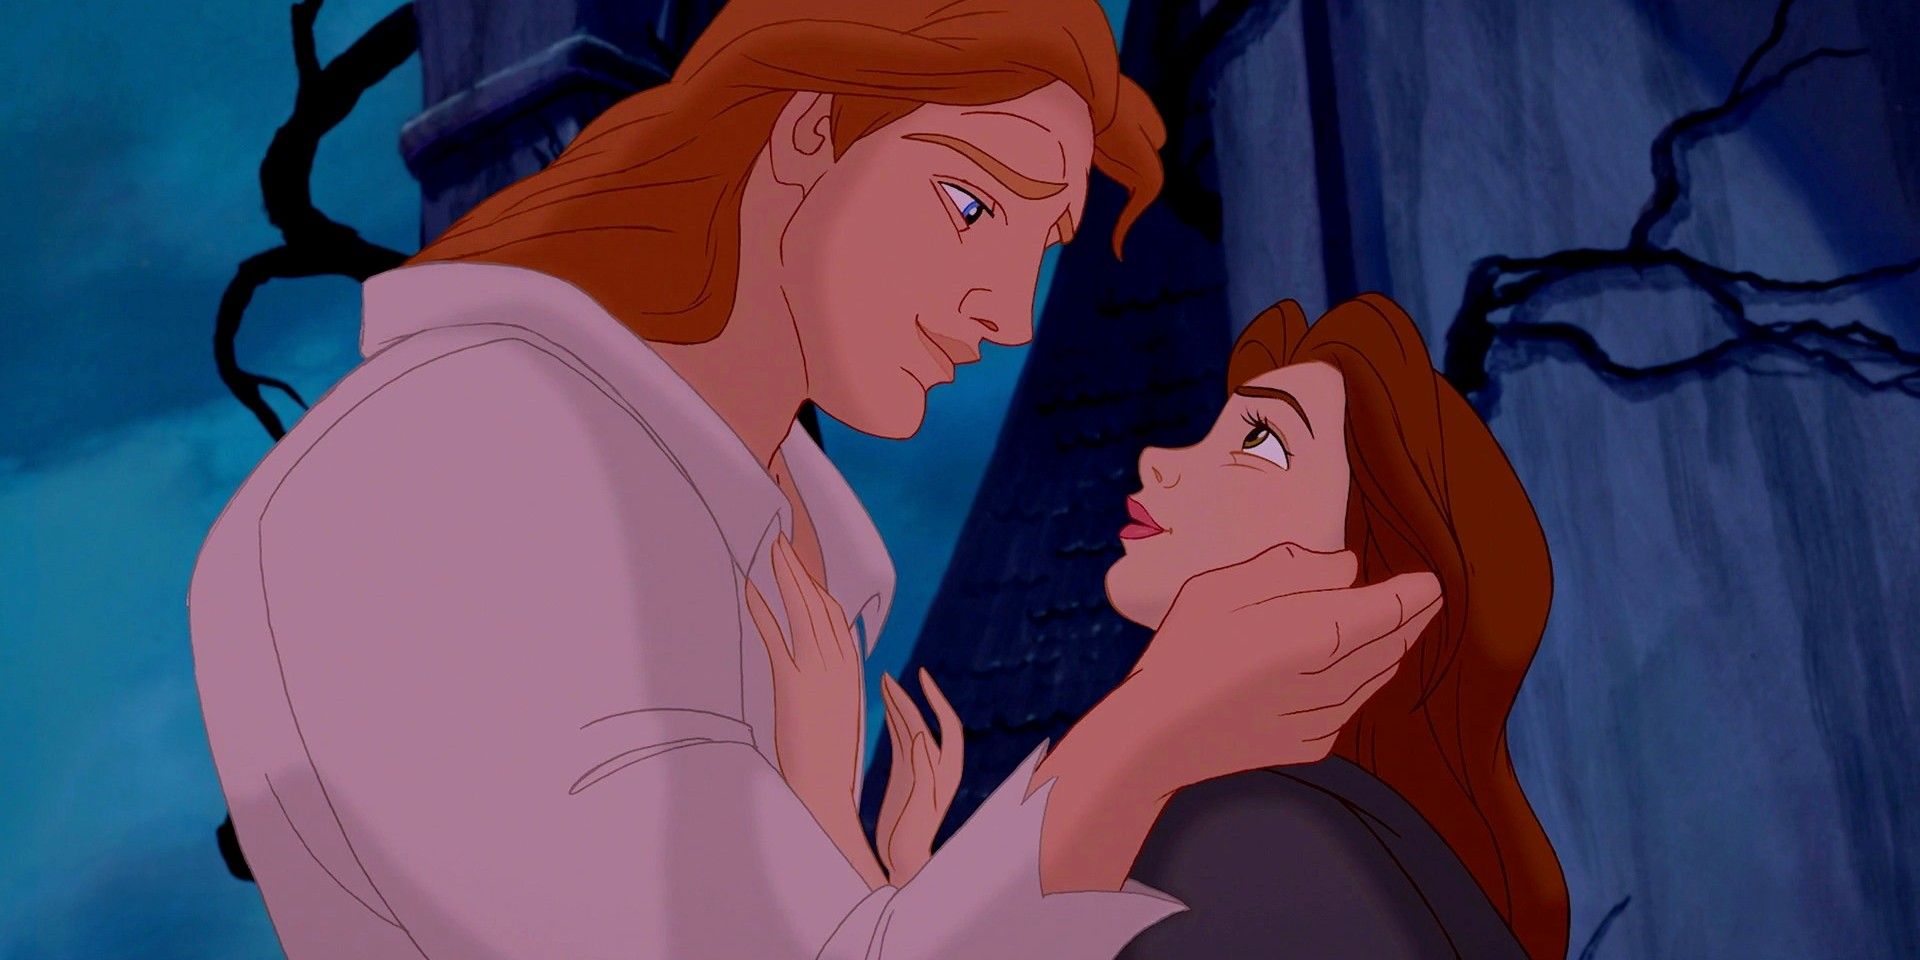 Disney's Beauty and the Beast featuring the human prince embracing Belle